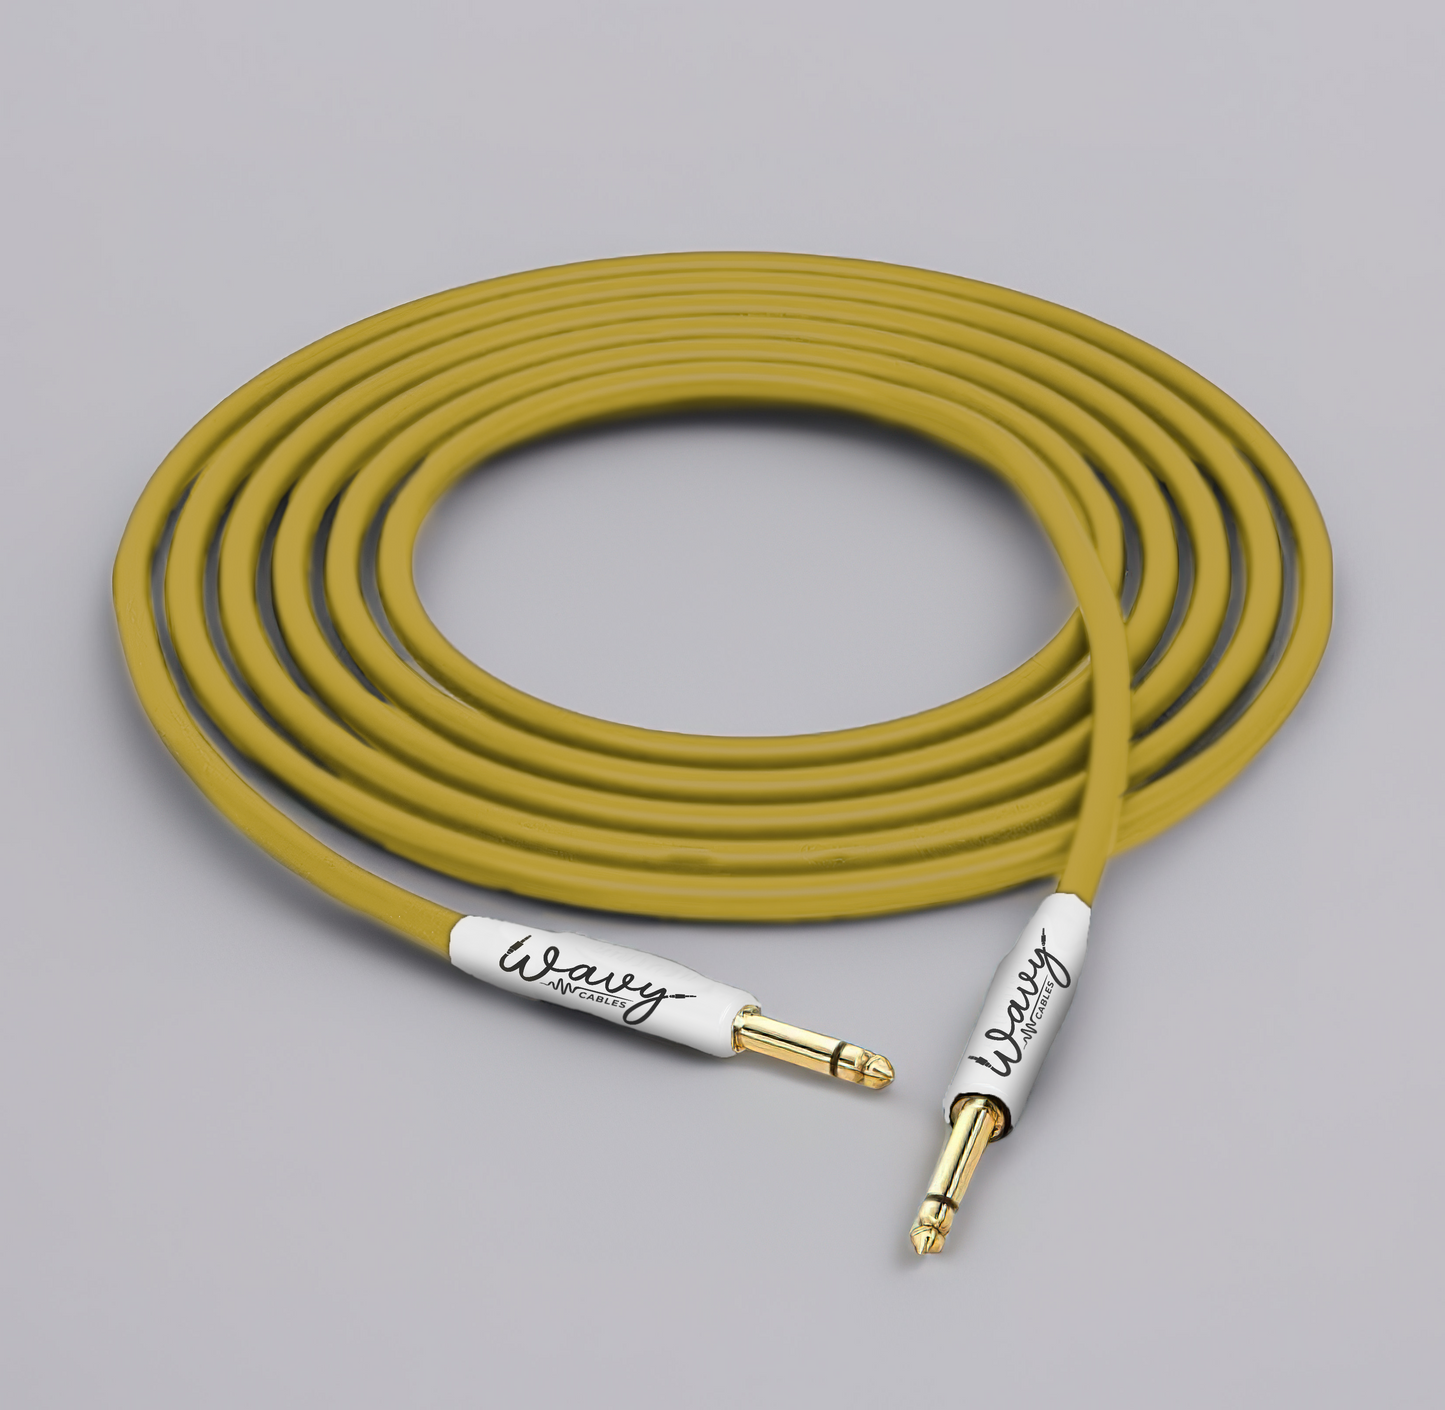 Straight to Straight / Instrument Cable (Yellow)